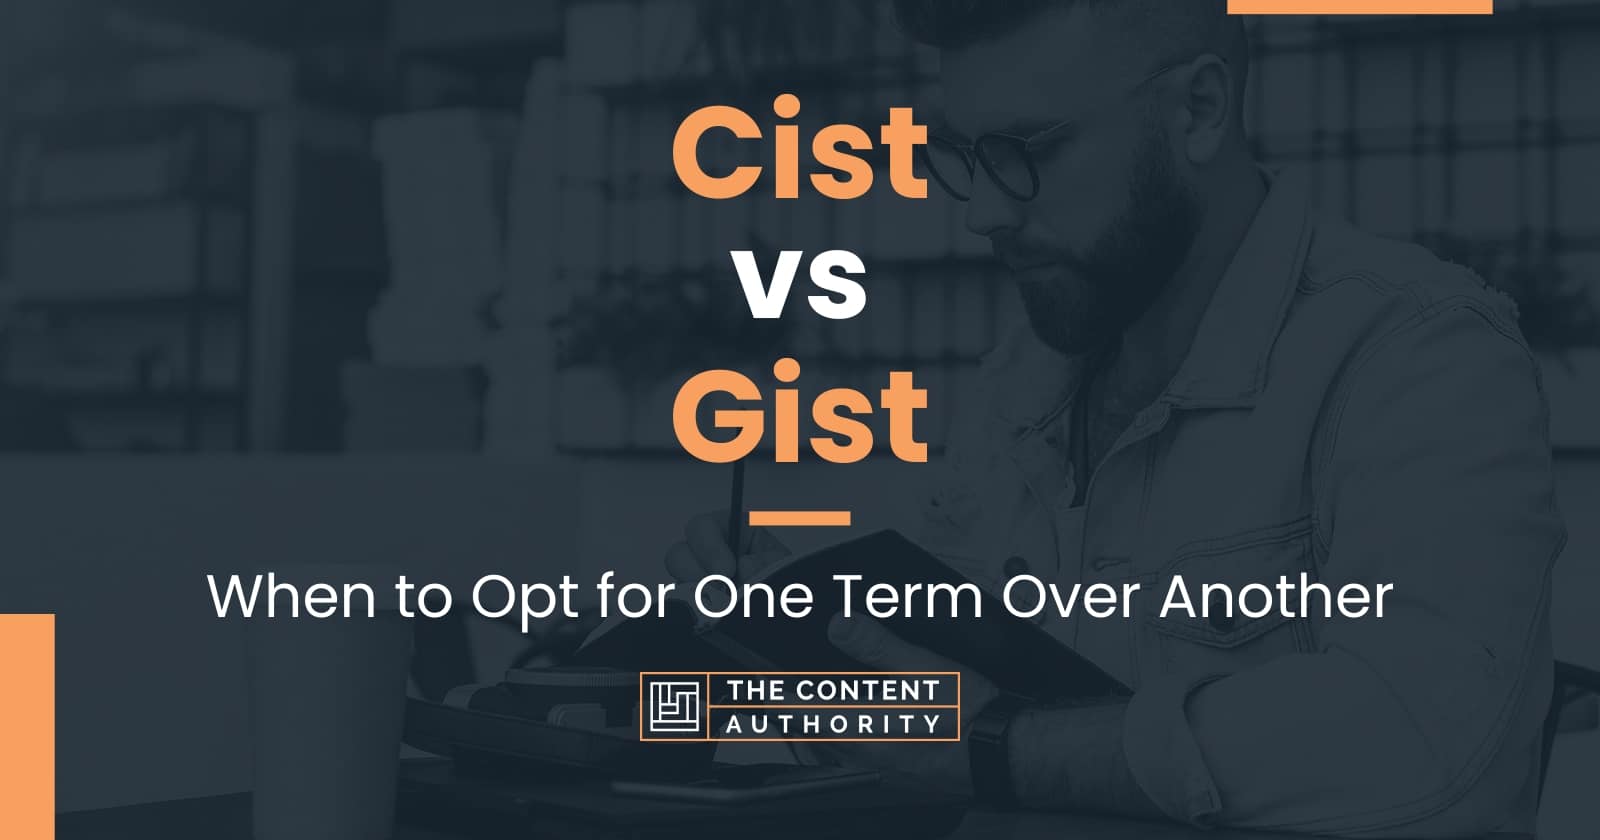 Cist vs Gist: When to Opt for One Term Over Another